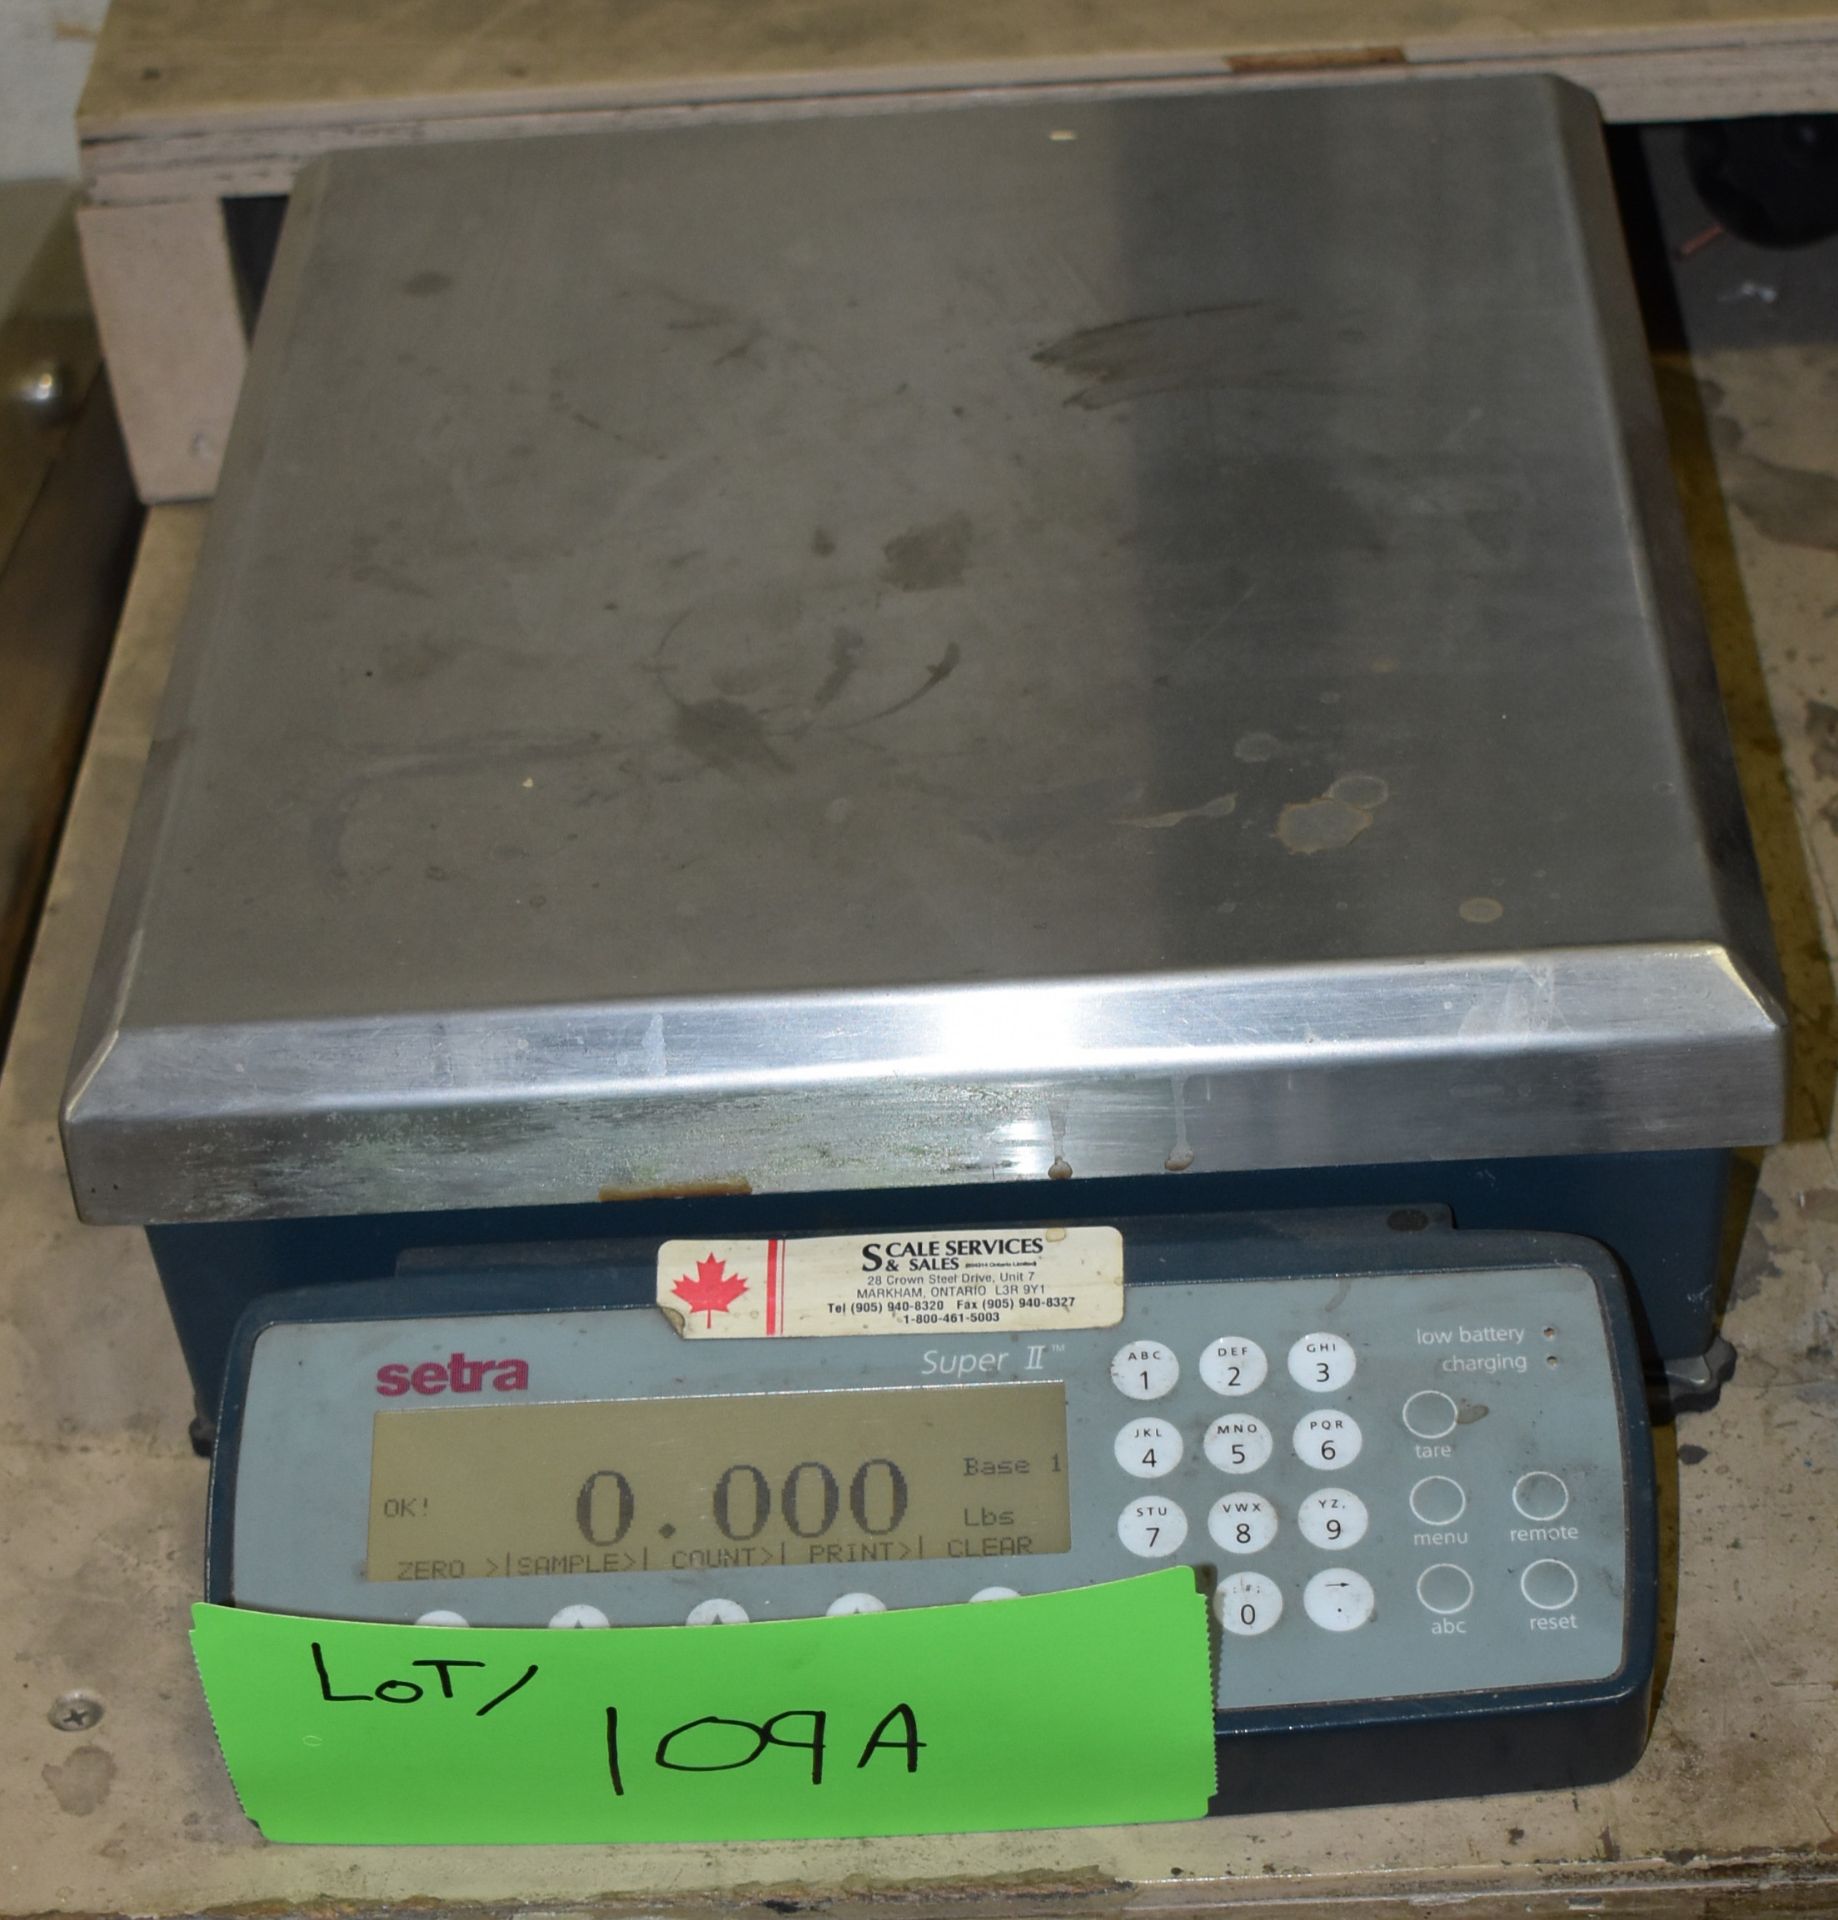 RICE LAKE ROUGHDECK PLATFORM SCALE WITH 20,000 LB. CAPACITY, SETRA SUPER II BENCH TYPE SCALE/DRO (